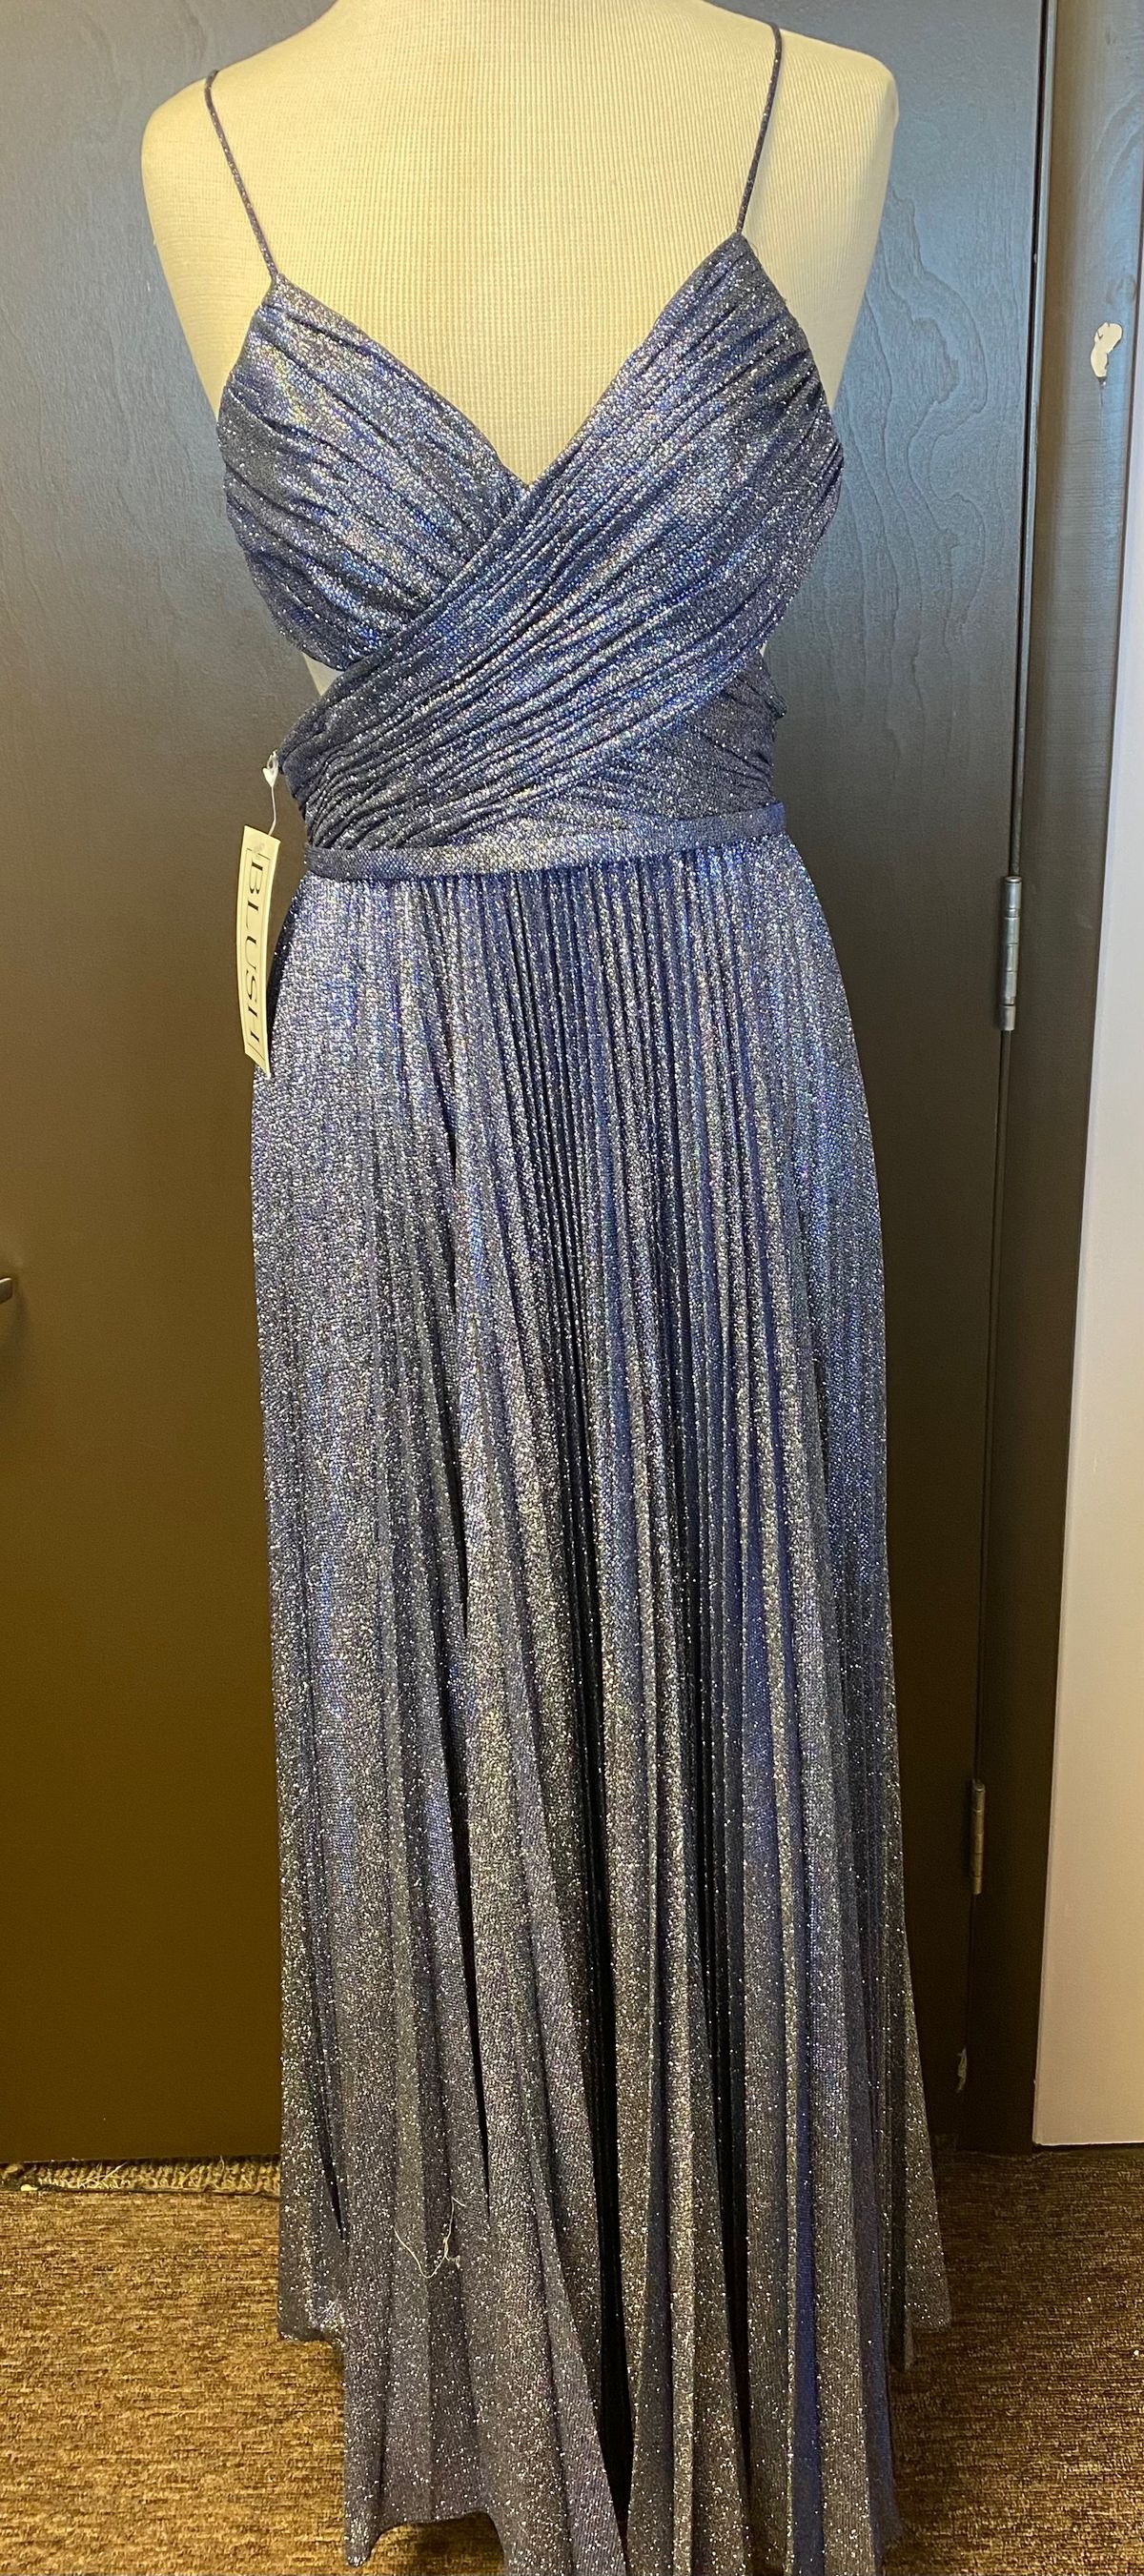 Blush Prom Size 6 Prom Plunge Navy Blue A-line Dress on Queenly